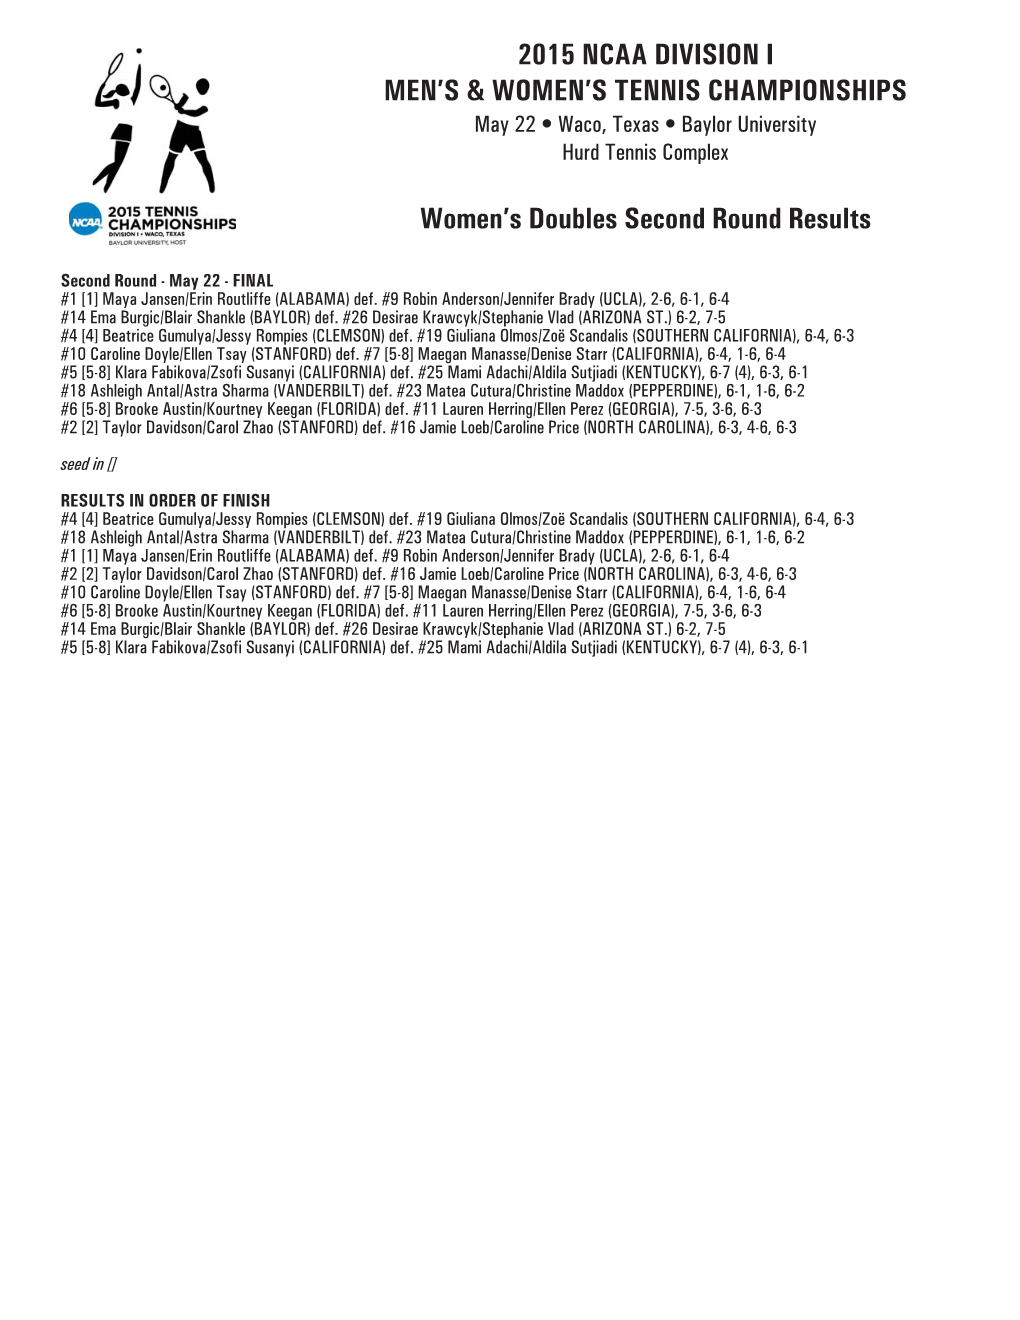 Women's Doubles Second Round Results Layout 1